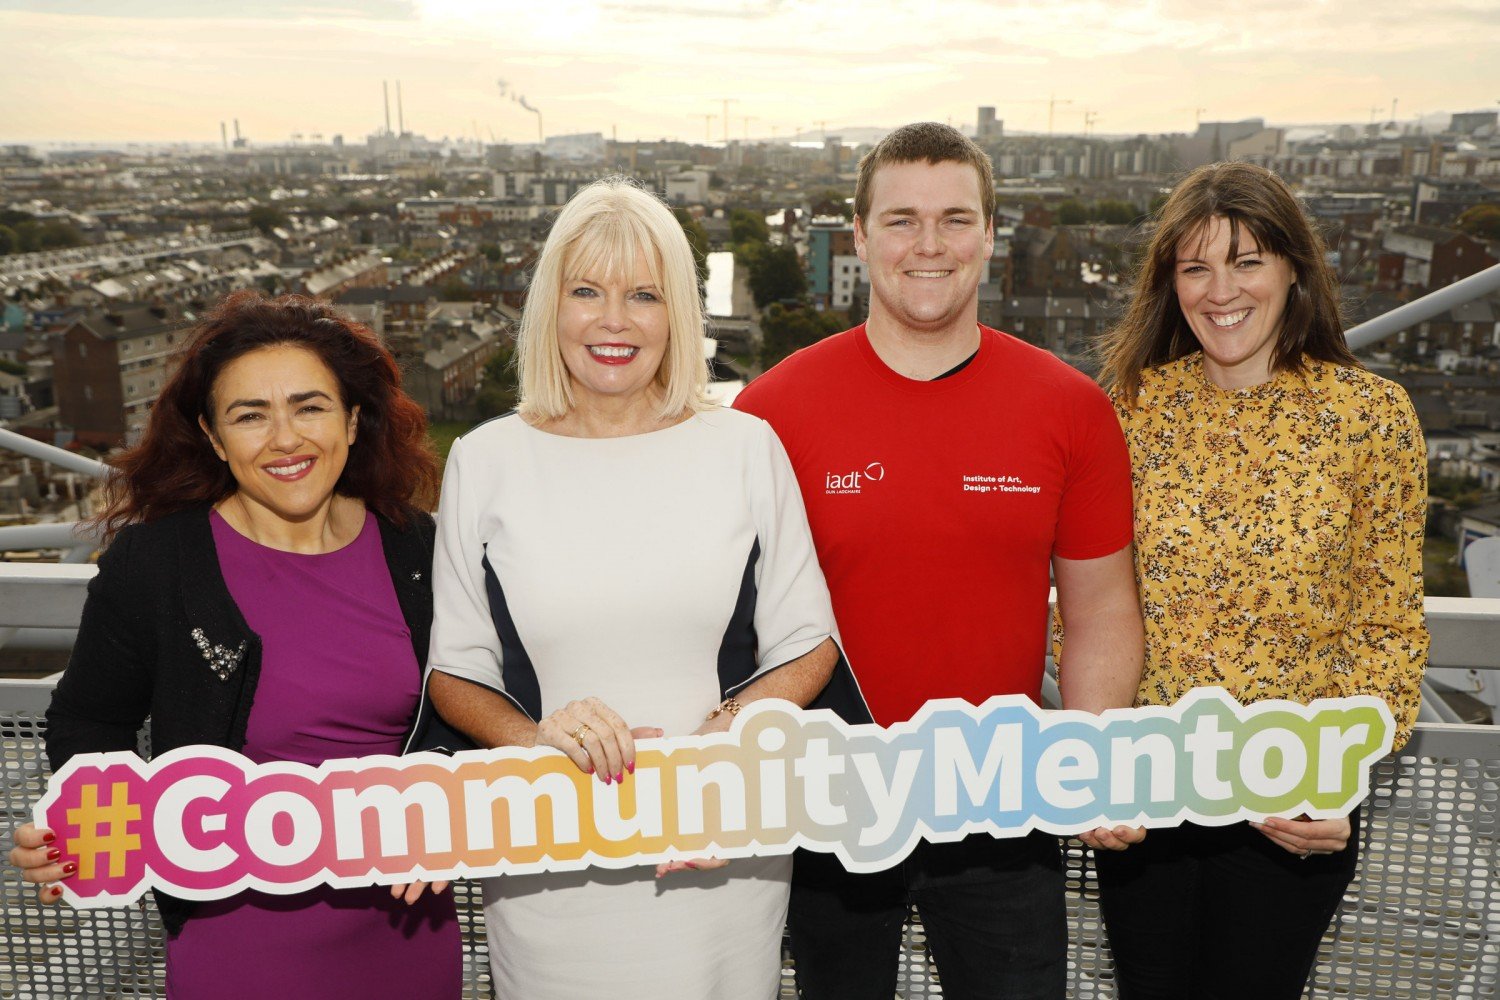 Denise McMorrow, Student Experience Manager IADT, Minister Mary Mitchell O’Connor, Reuben Noyes, Community Mentor from IADT, Sinead McEntee, Access Officer IADT